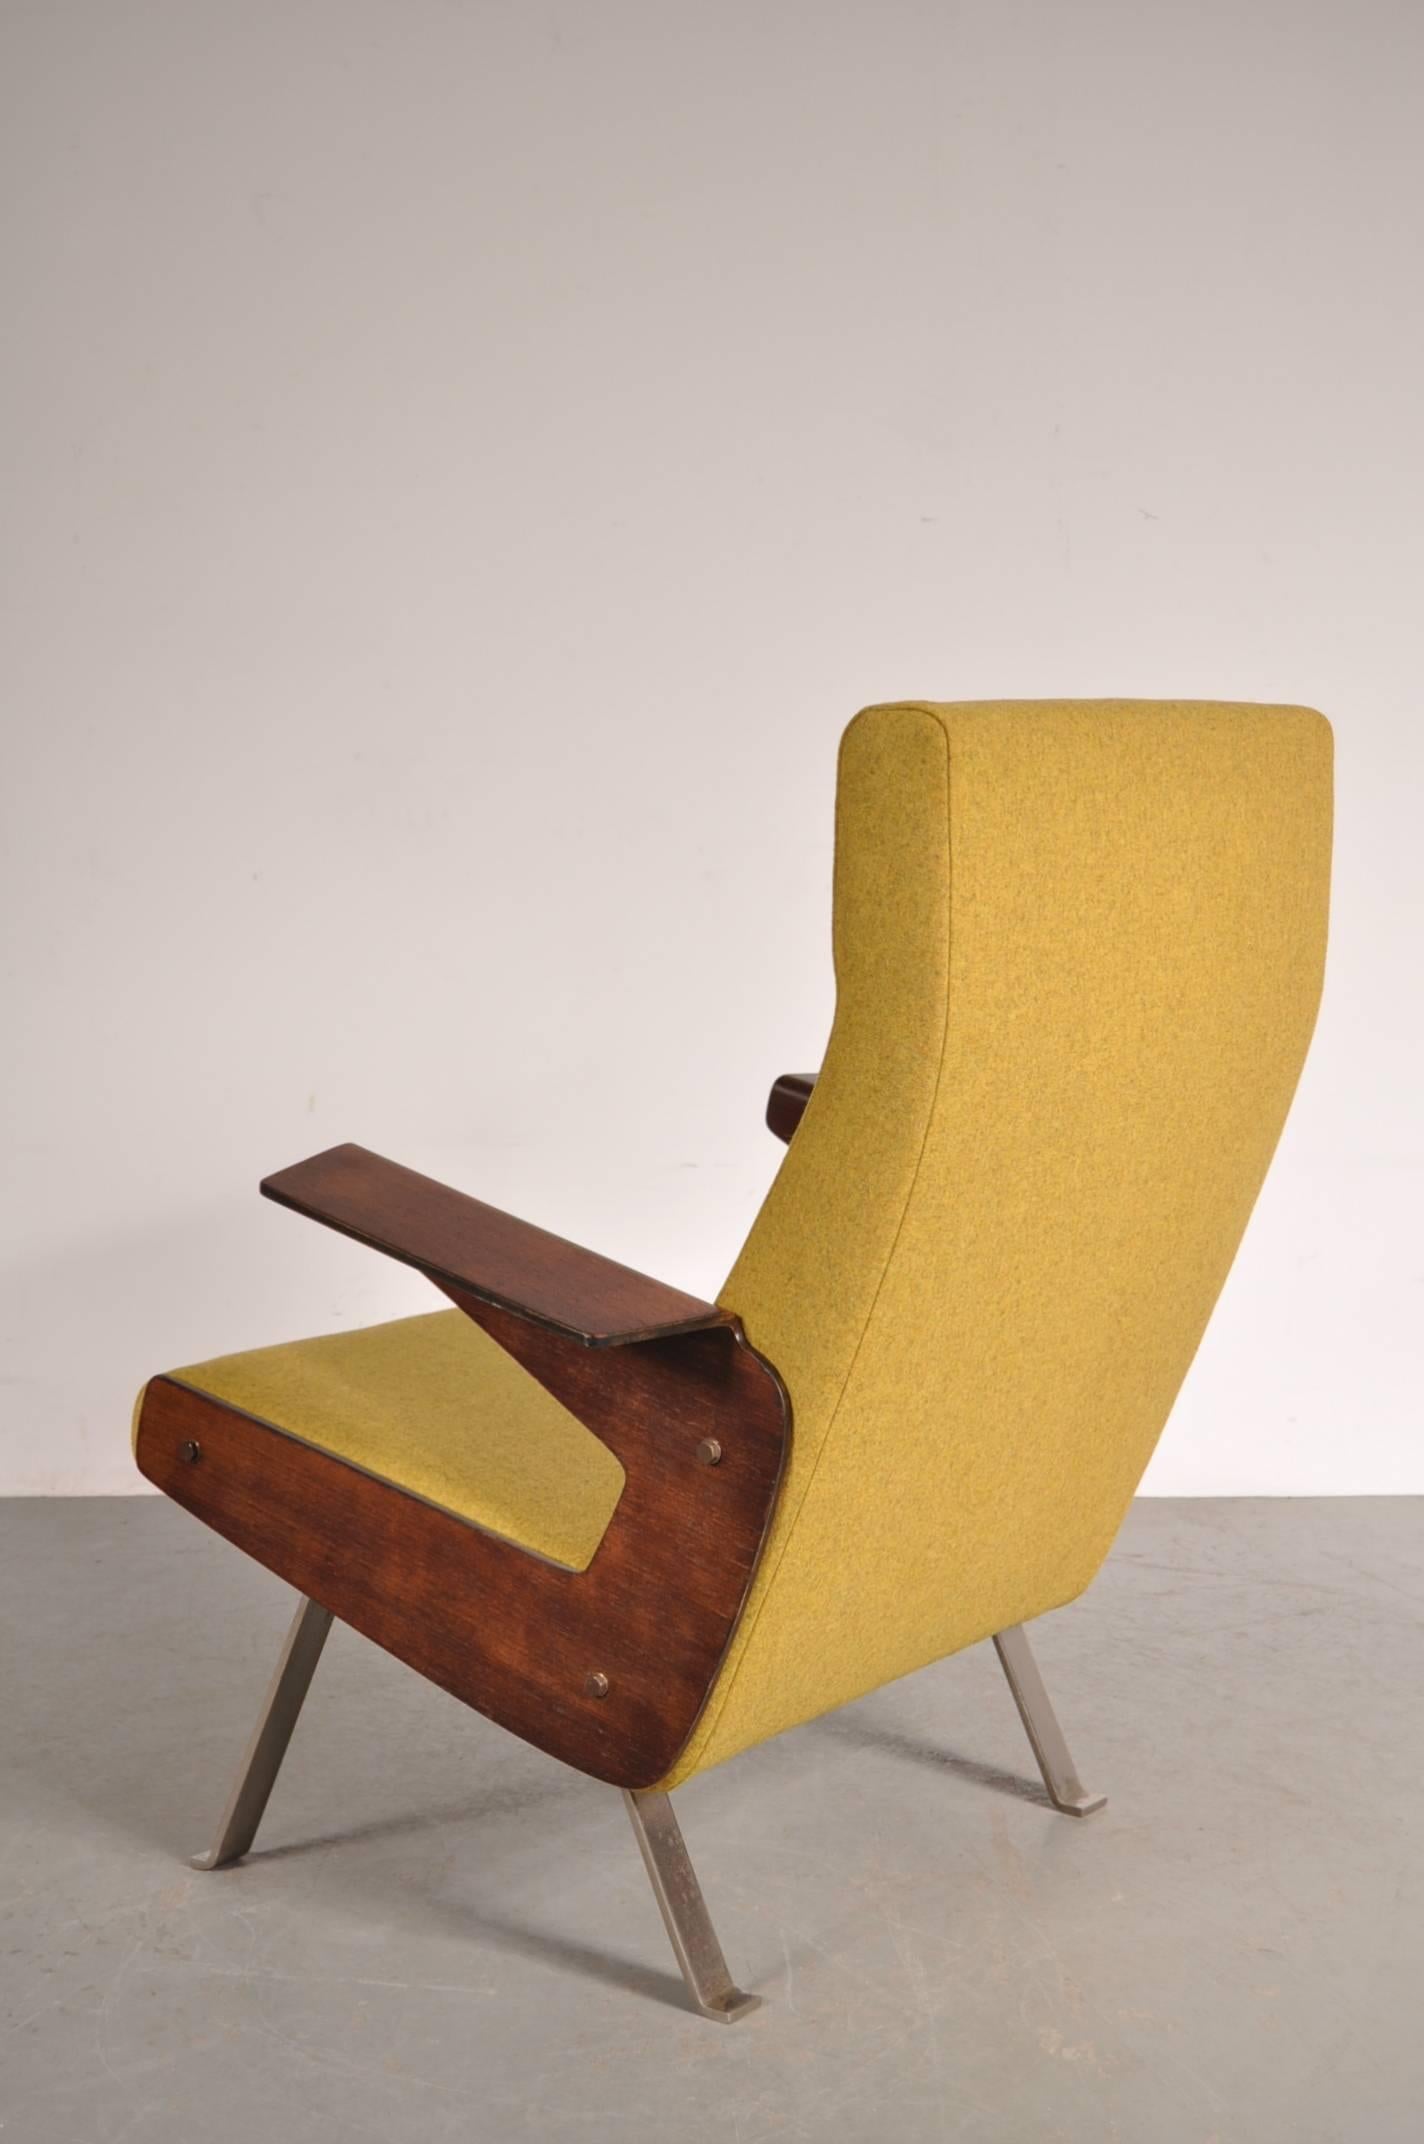 Plated Rare Armchair by Joseph-André Motte for Steiner, France, 1955